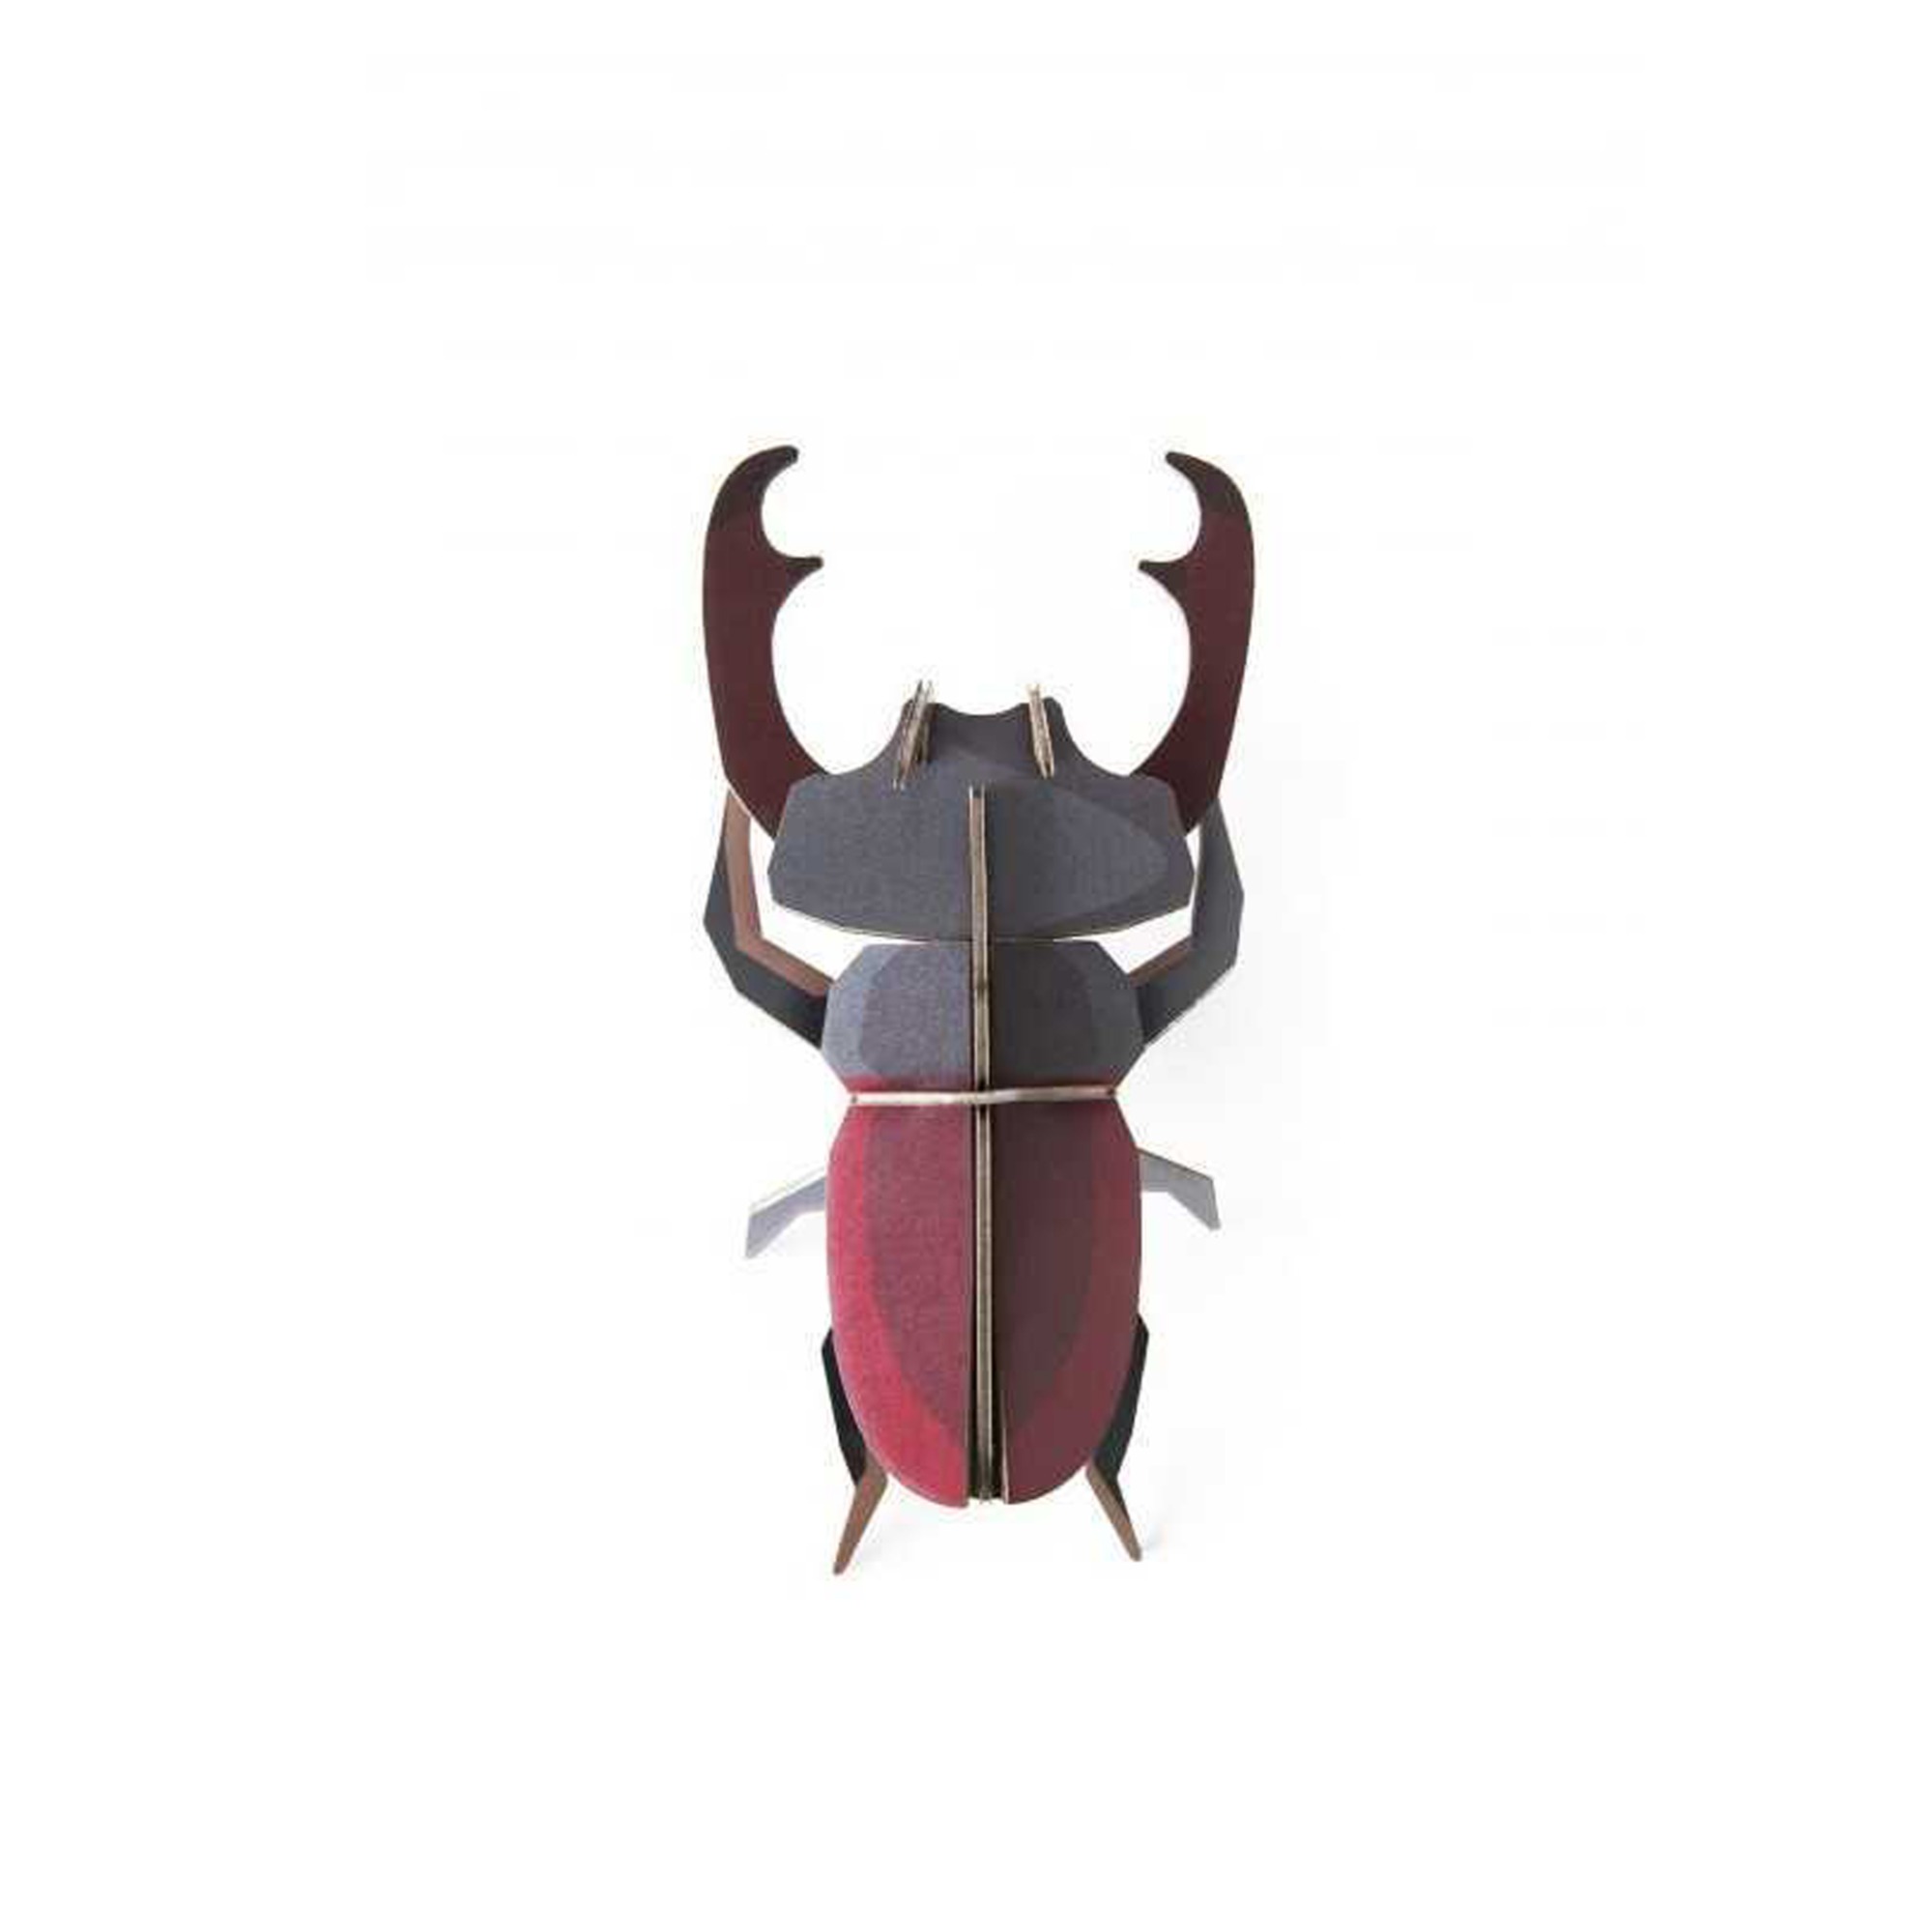 Studio Roof Wall Décor, Little Wonders of Nature - Stag Beetle